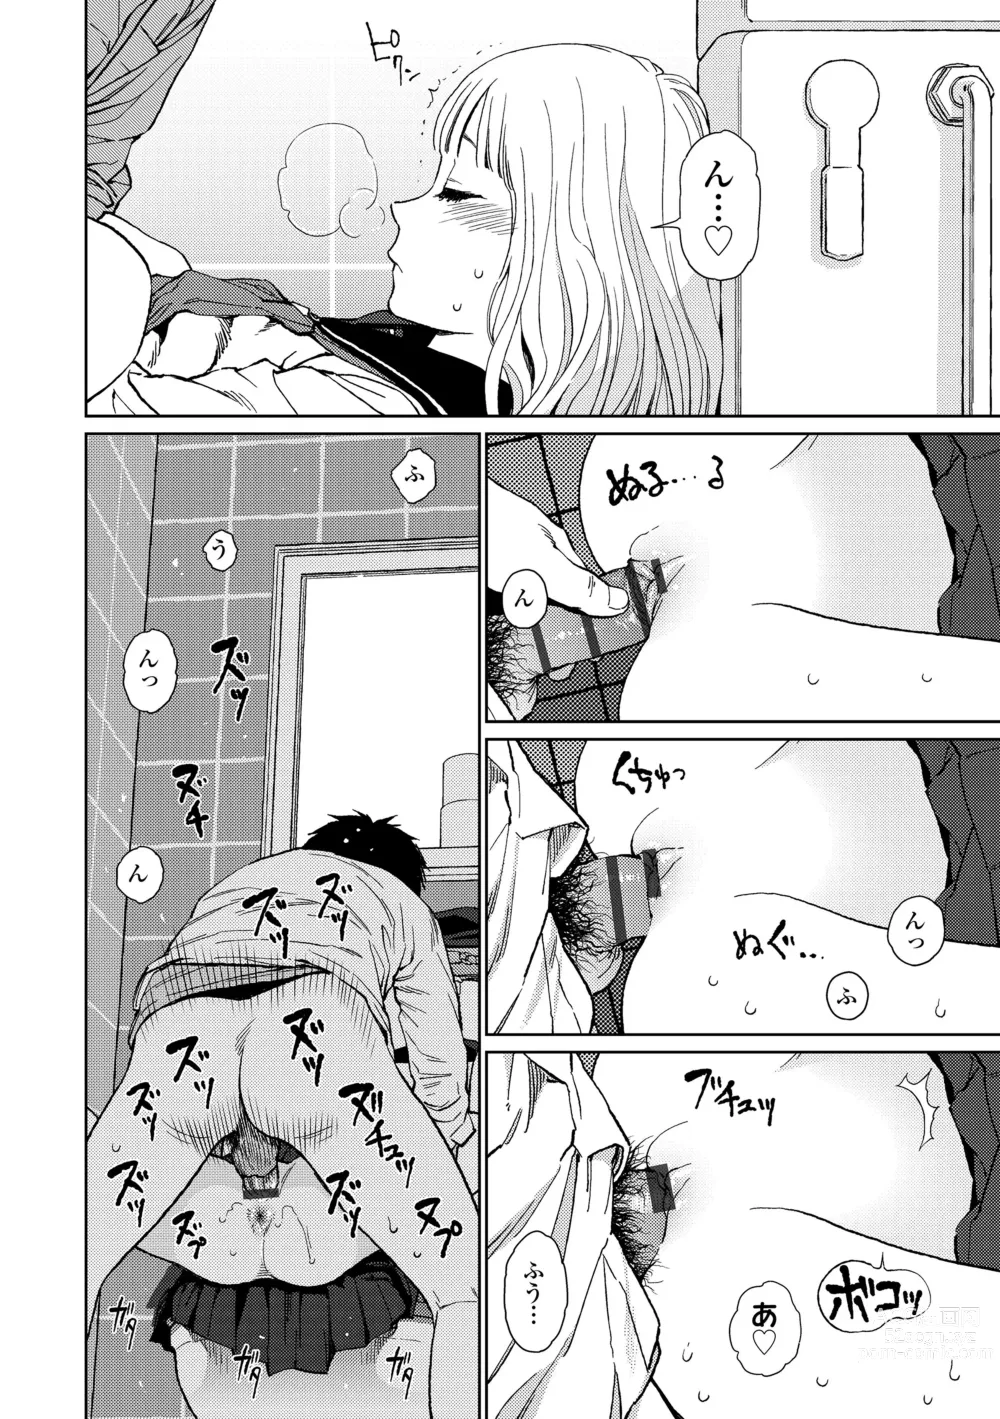 Page 174 of manga The Girllove Diary